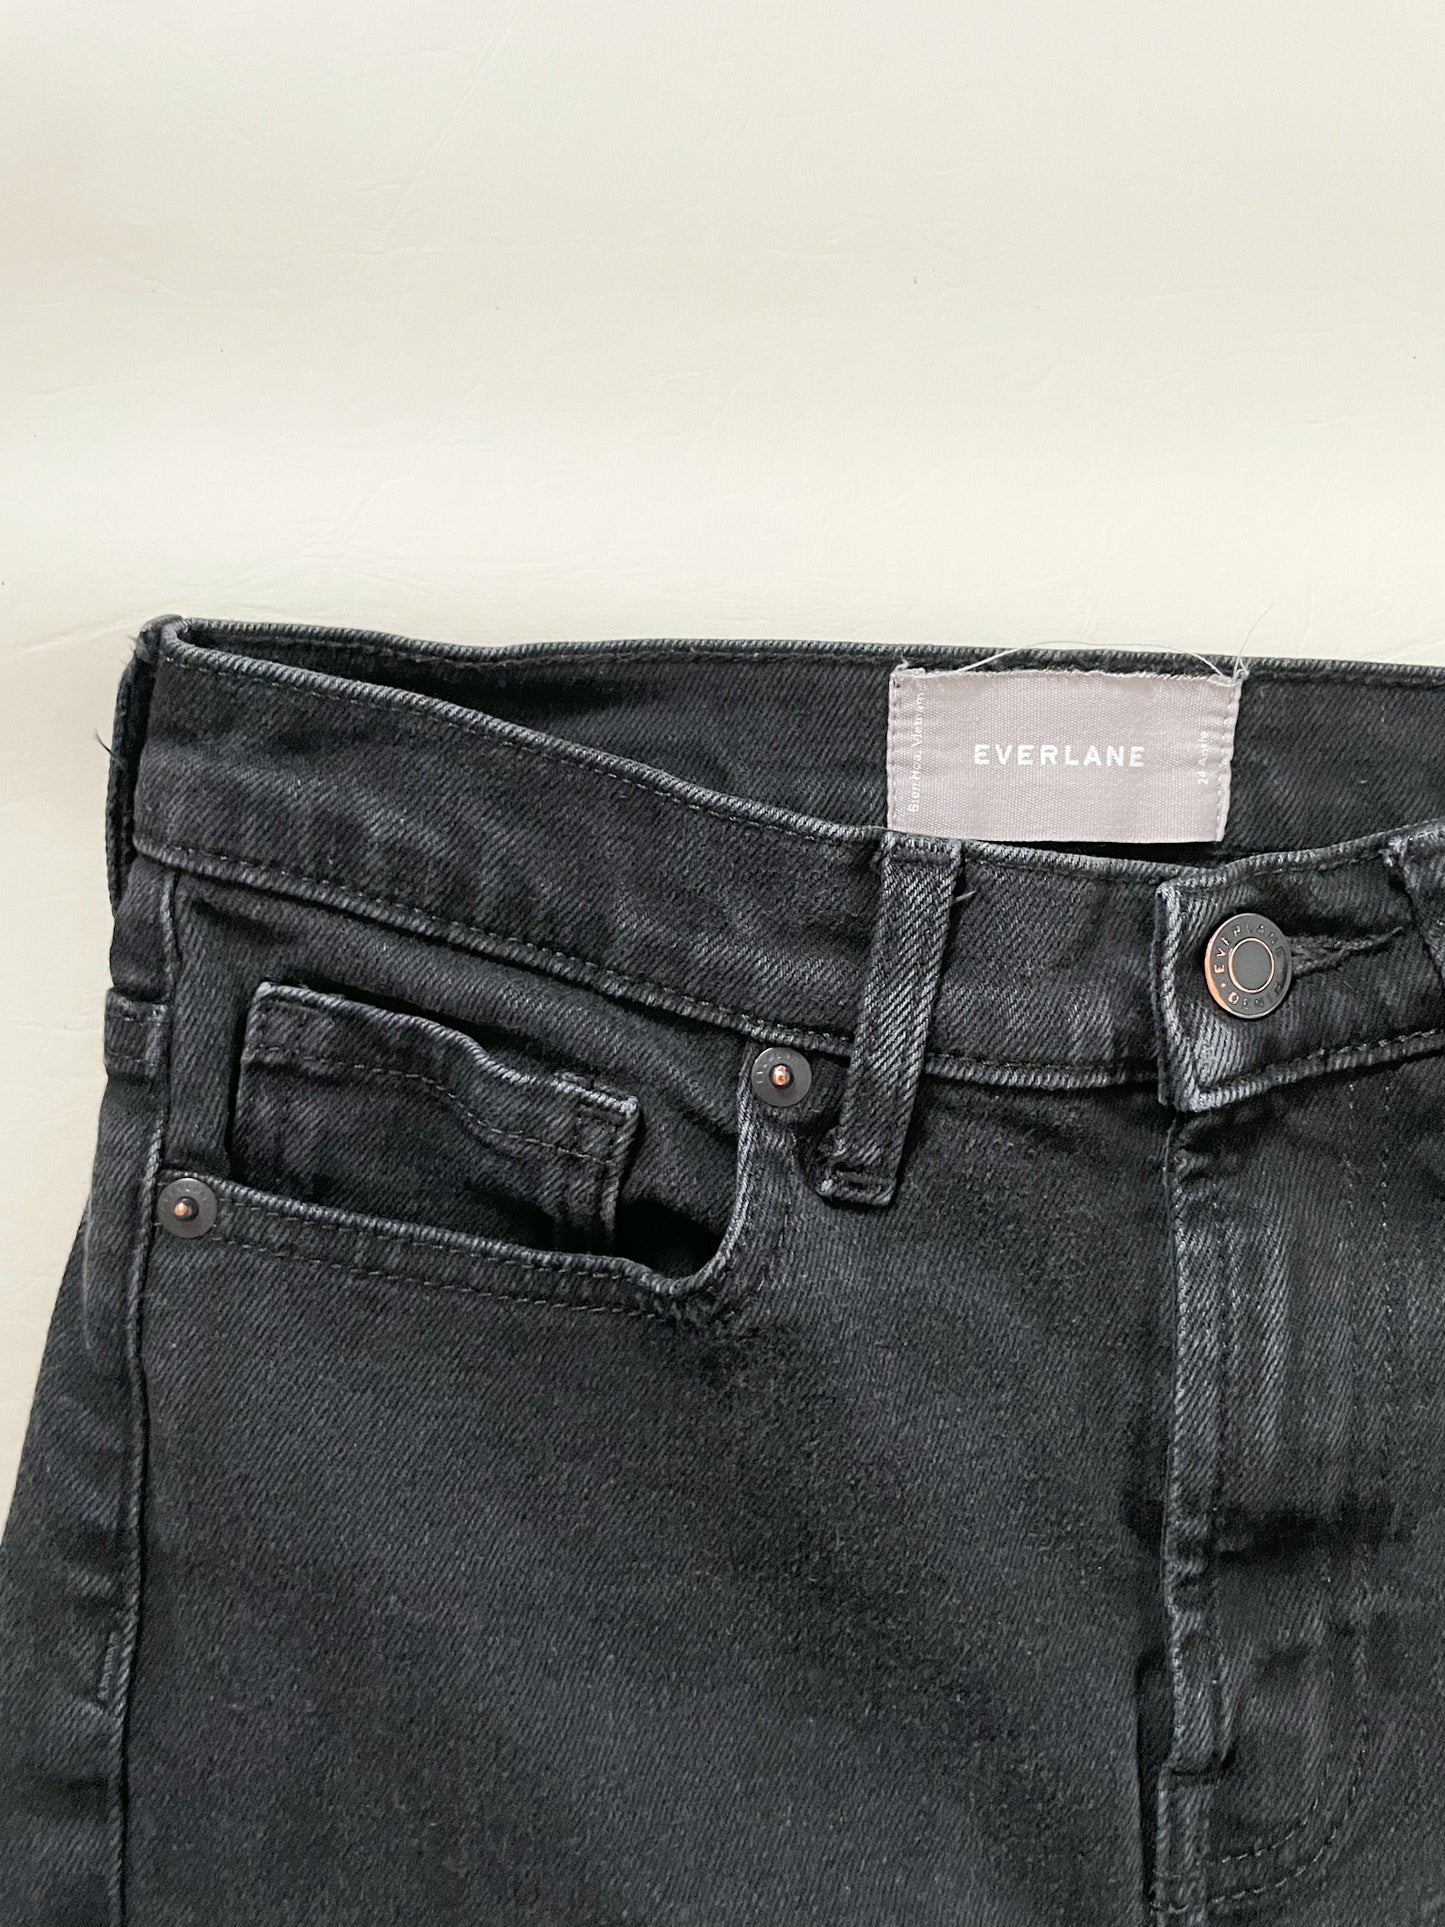 Everlane The Original Cheeky® High Rise Black Tapered Leg Ankle Jeans - Size 24